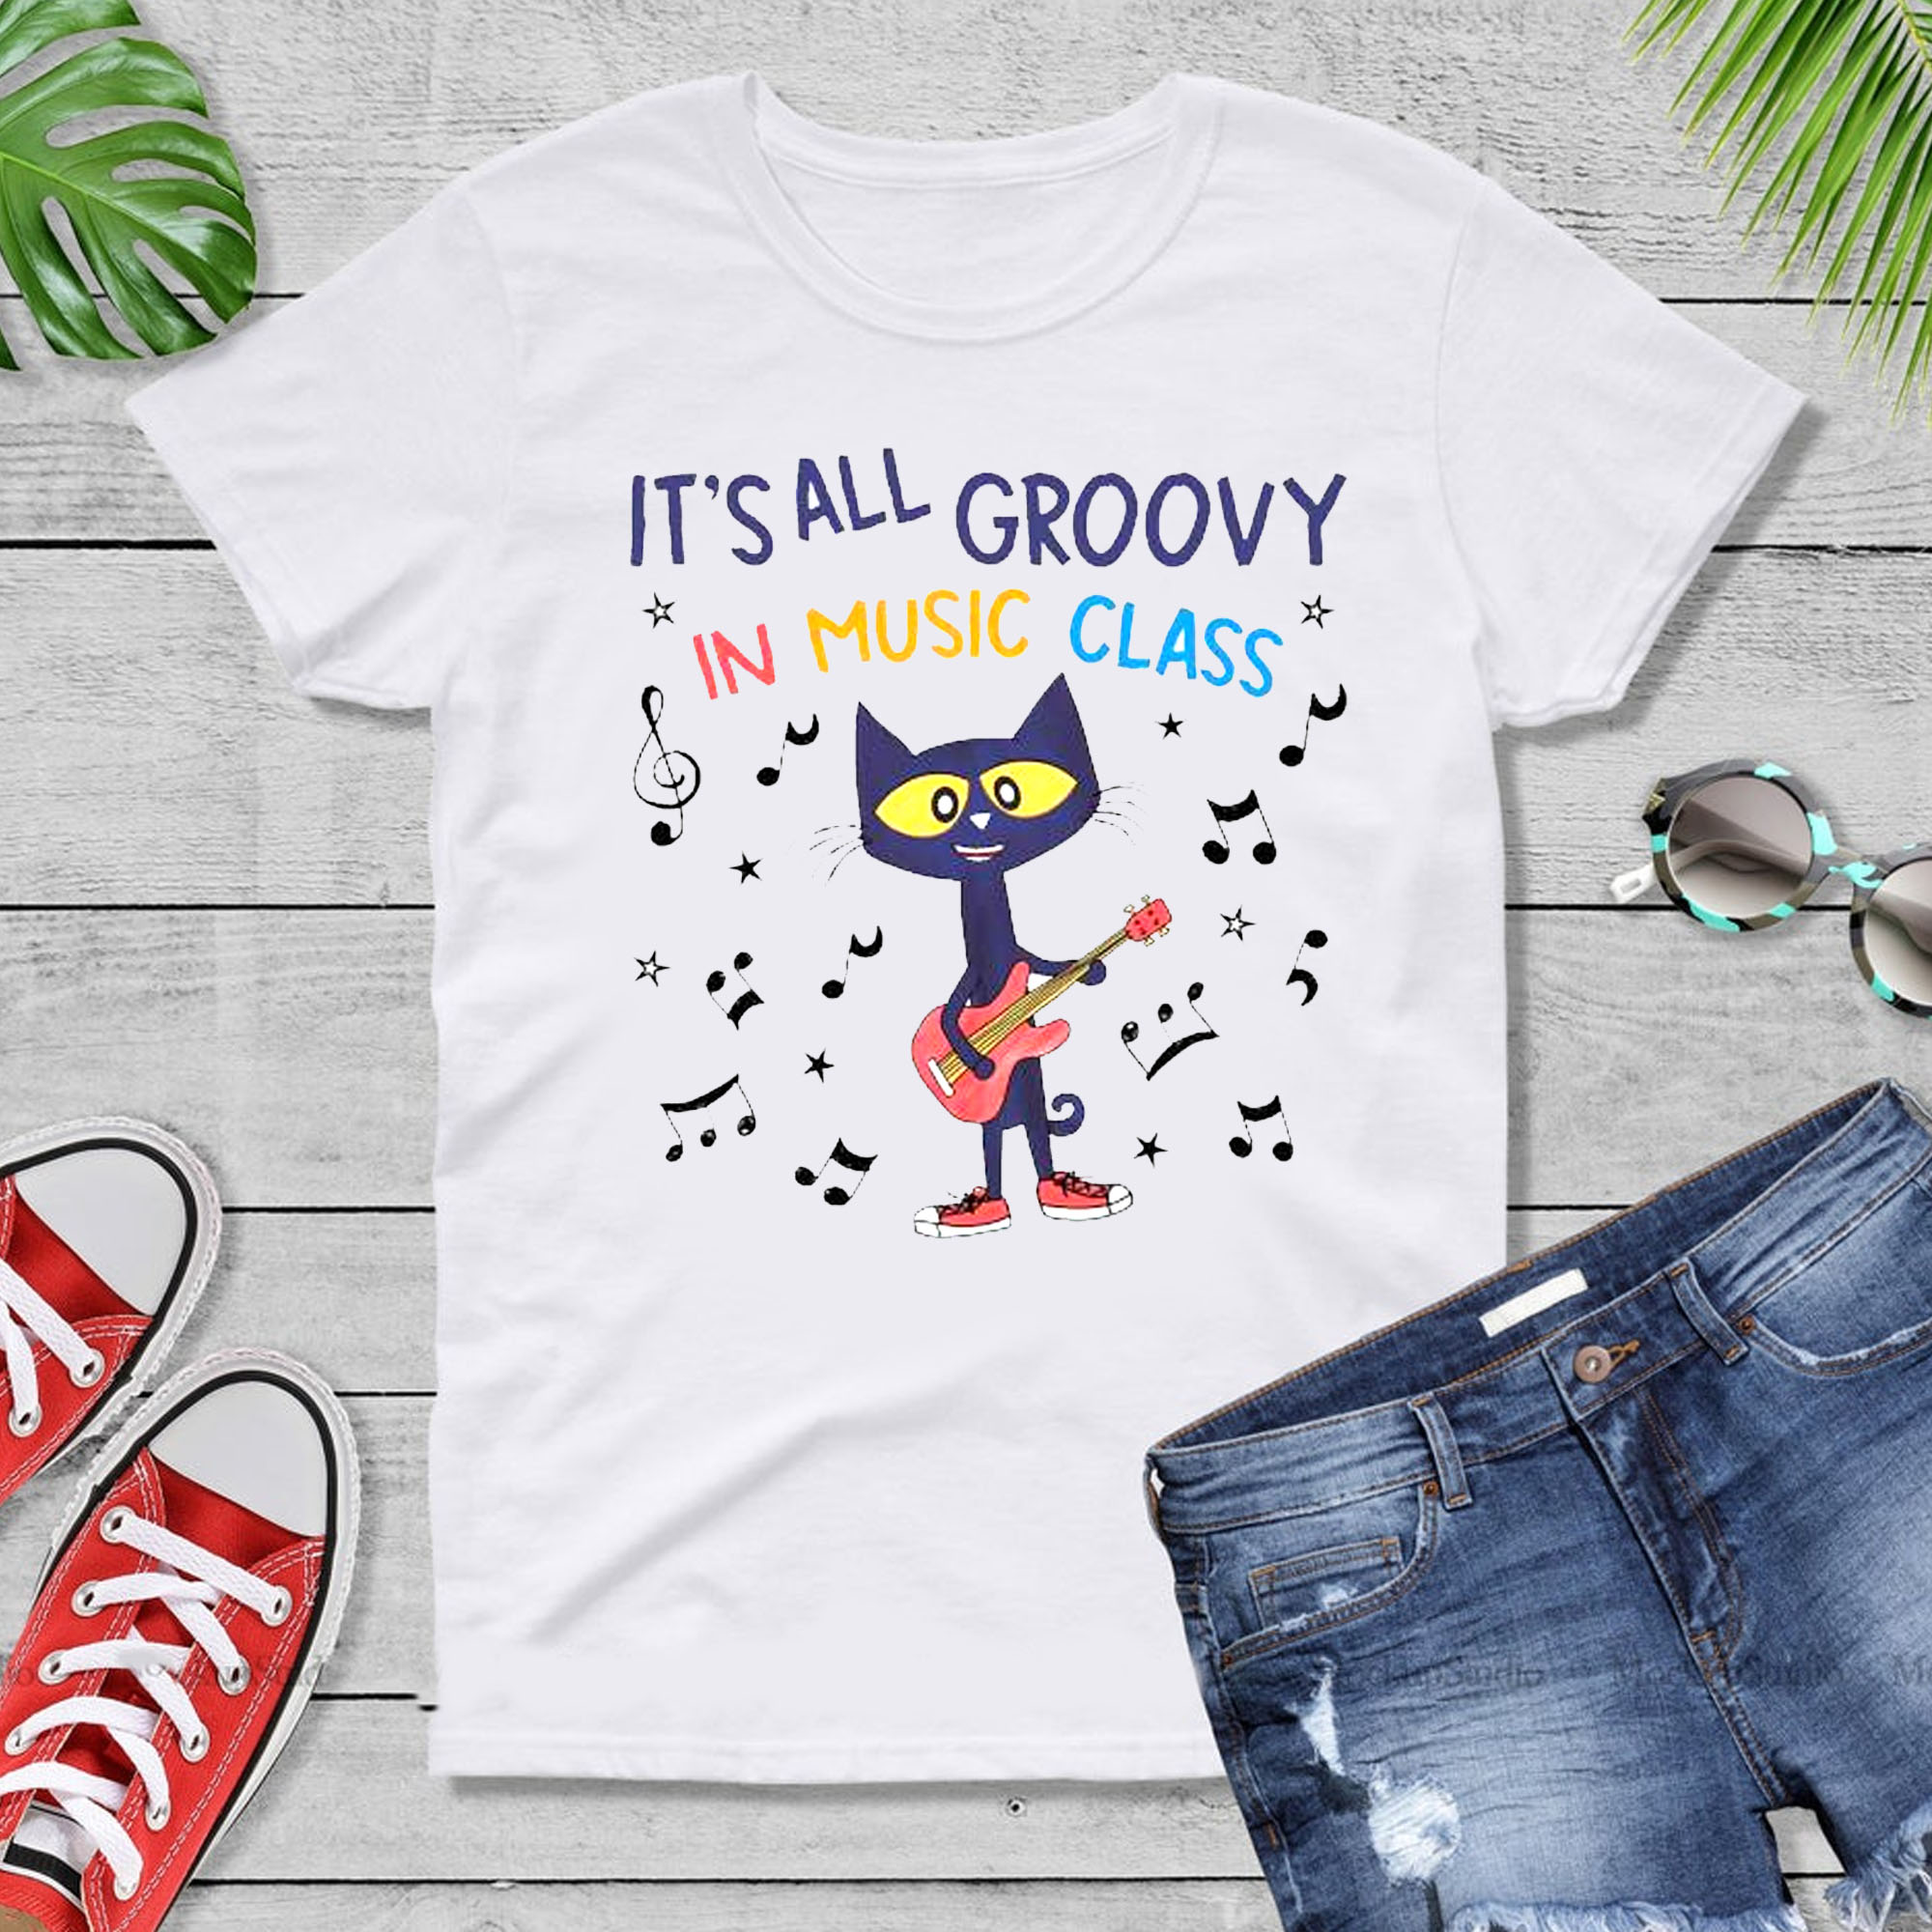 Pete The Cat Shirt, Its All Groovy In Music Class Shirt